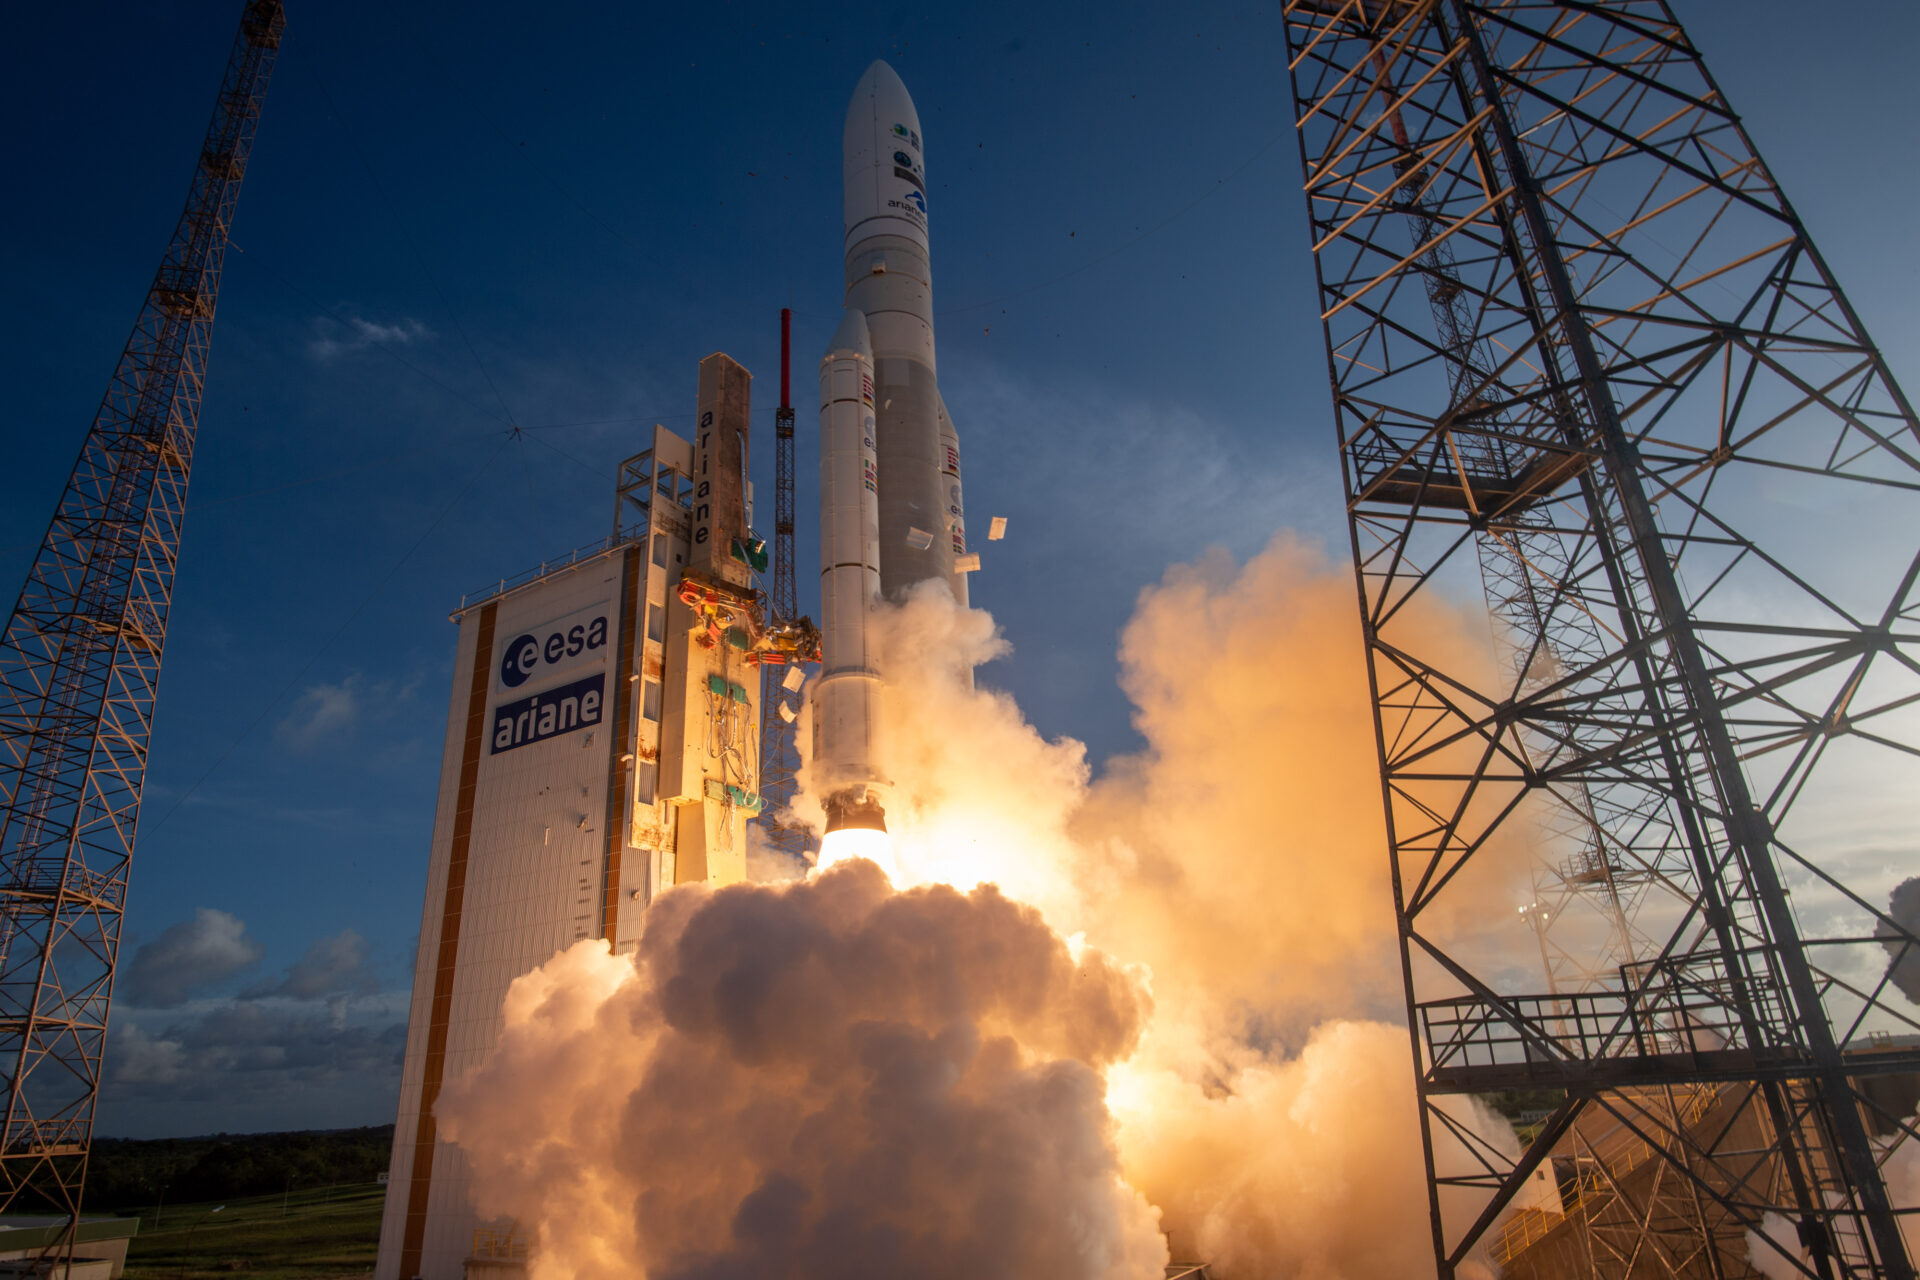 Ariane 5 has two launches left before “retirement”